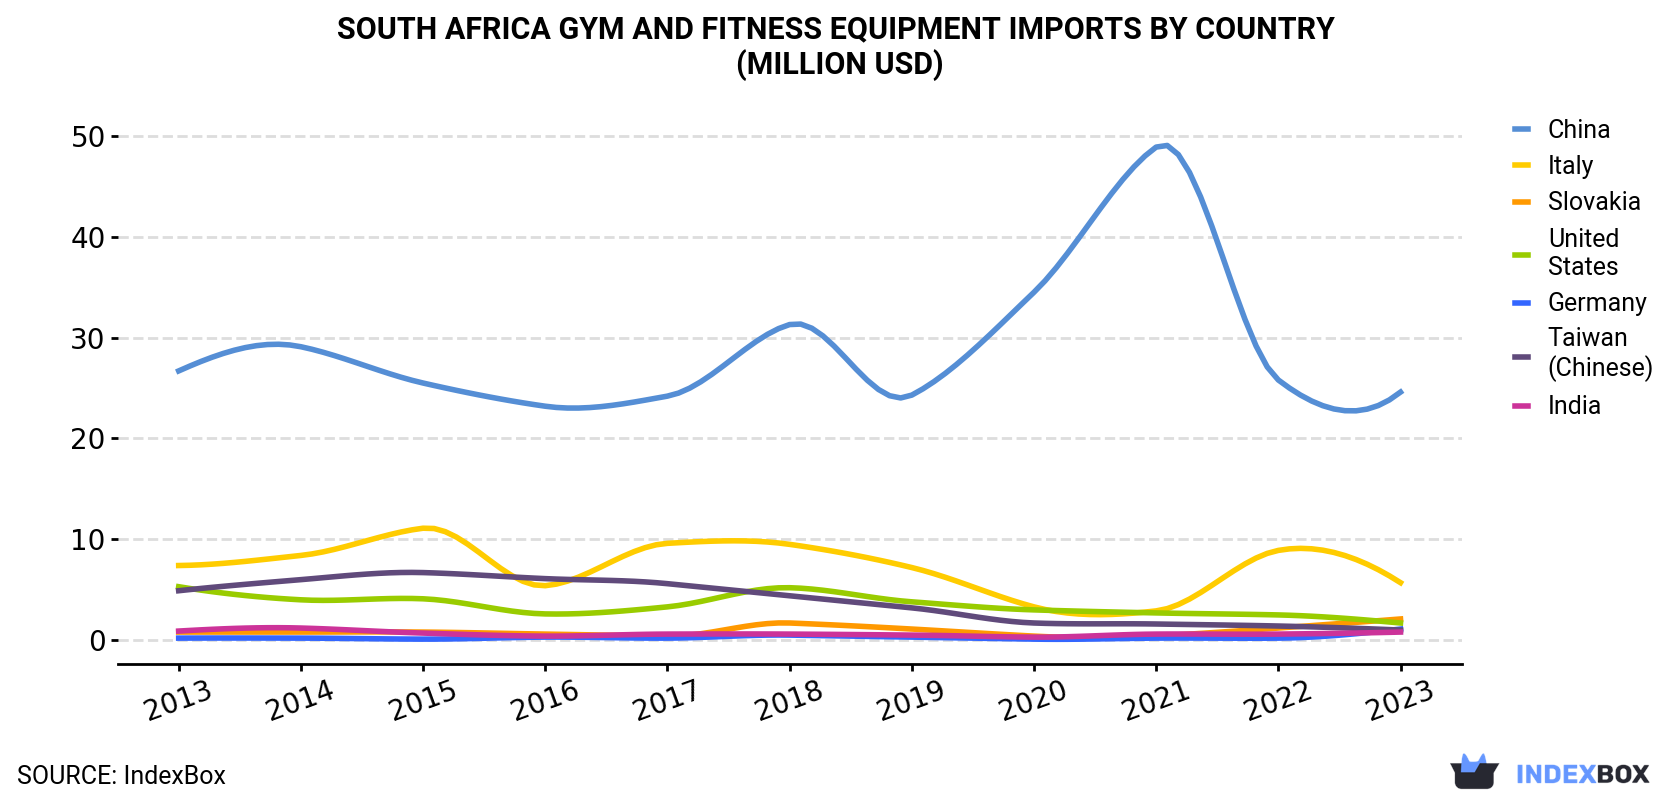 South Africa Gym and Fitness Equipment Imports By Country (Million USD)